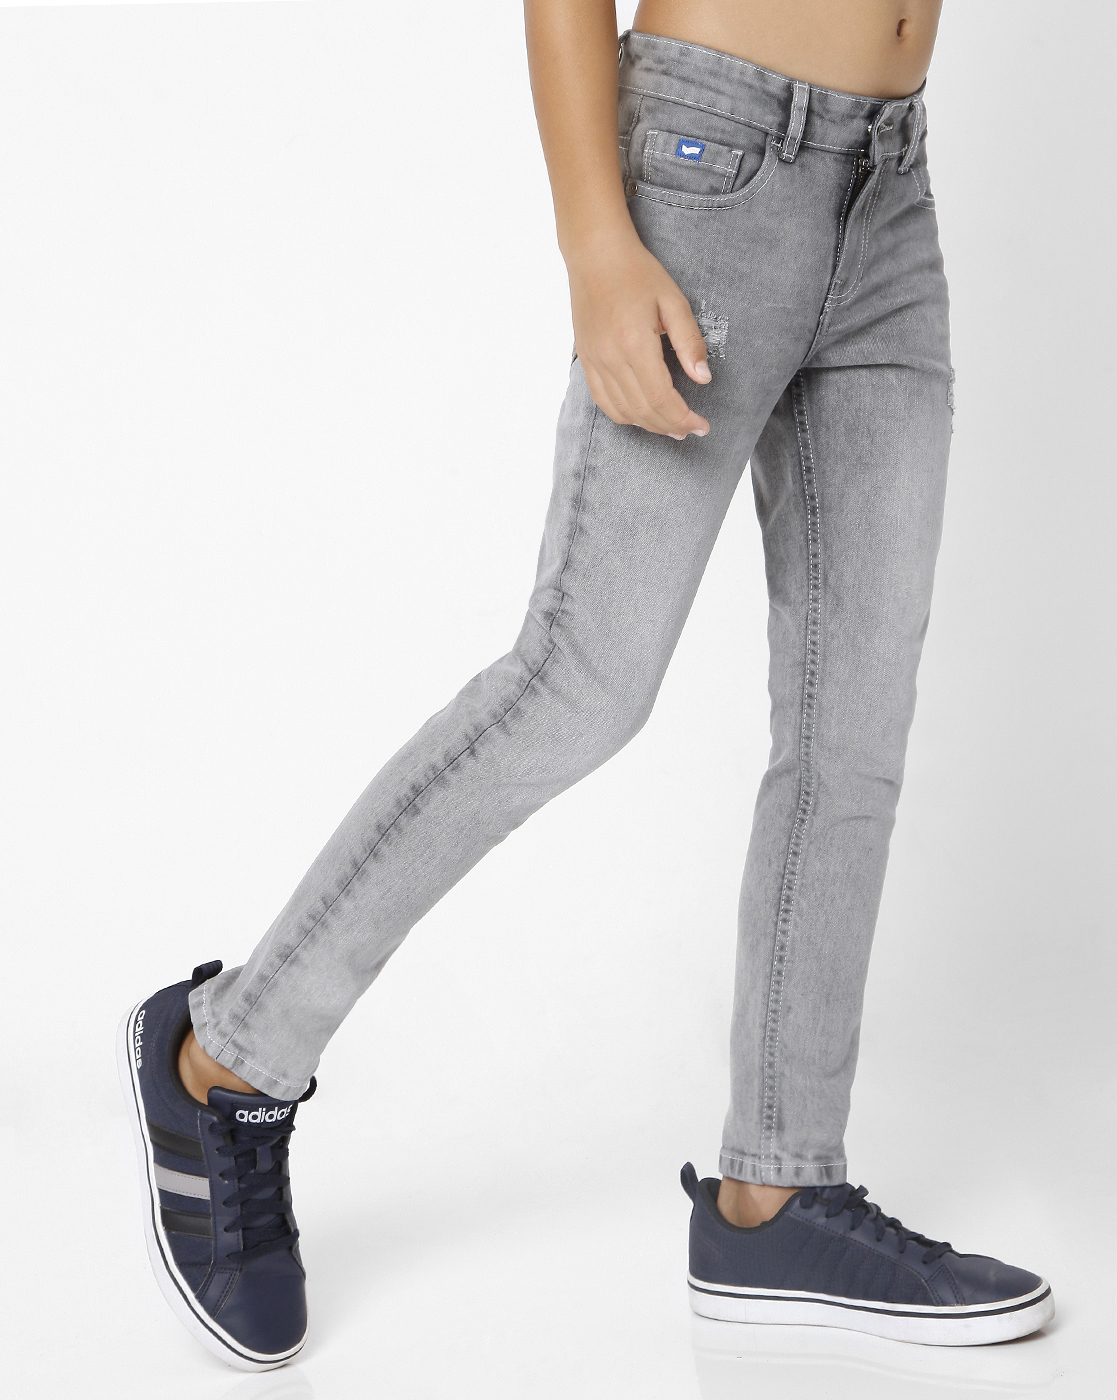 GAS KIDS Boys Solid Grey Jeans